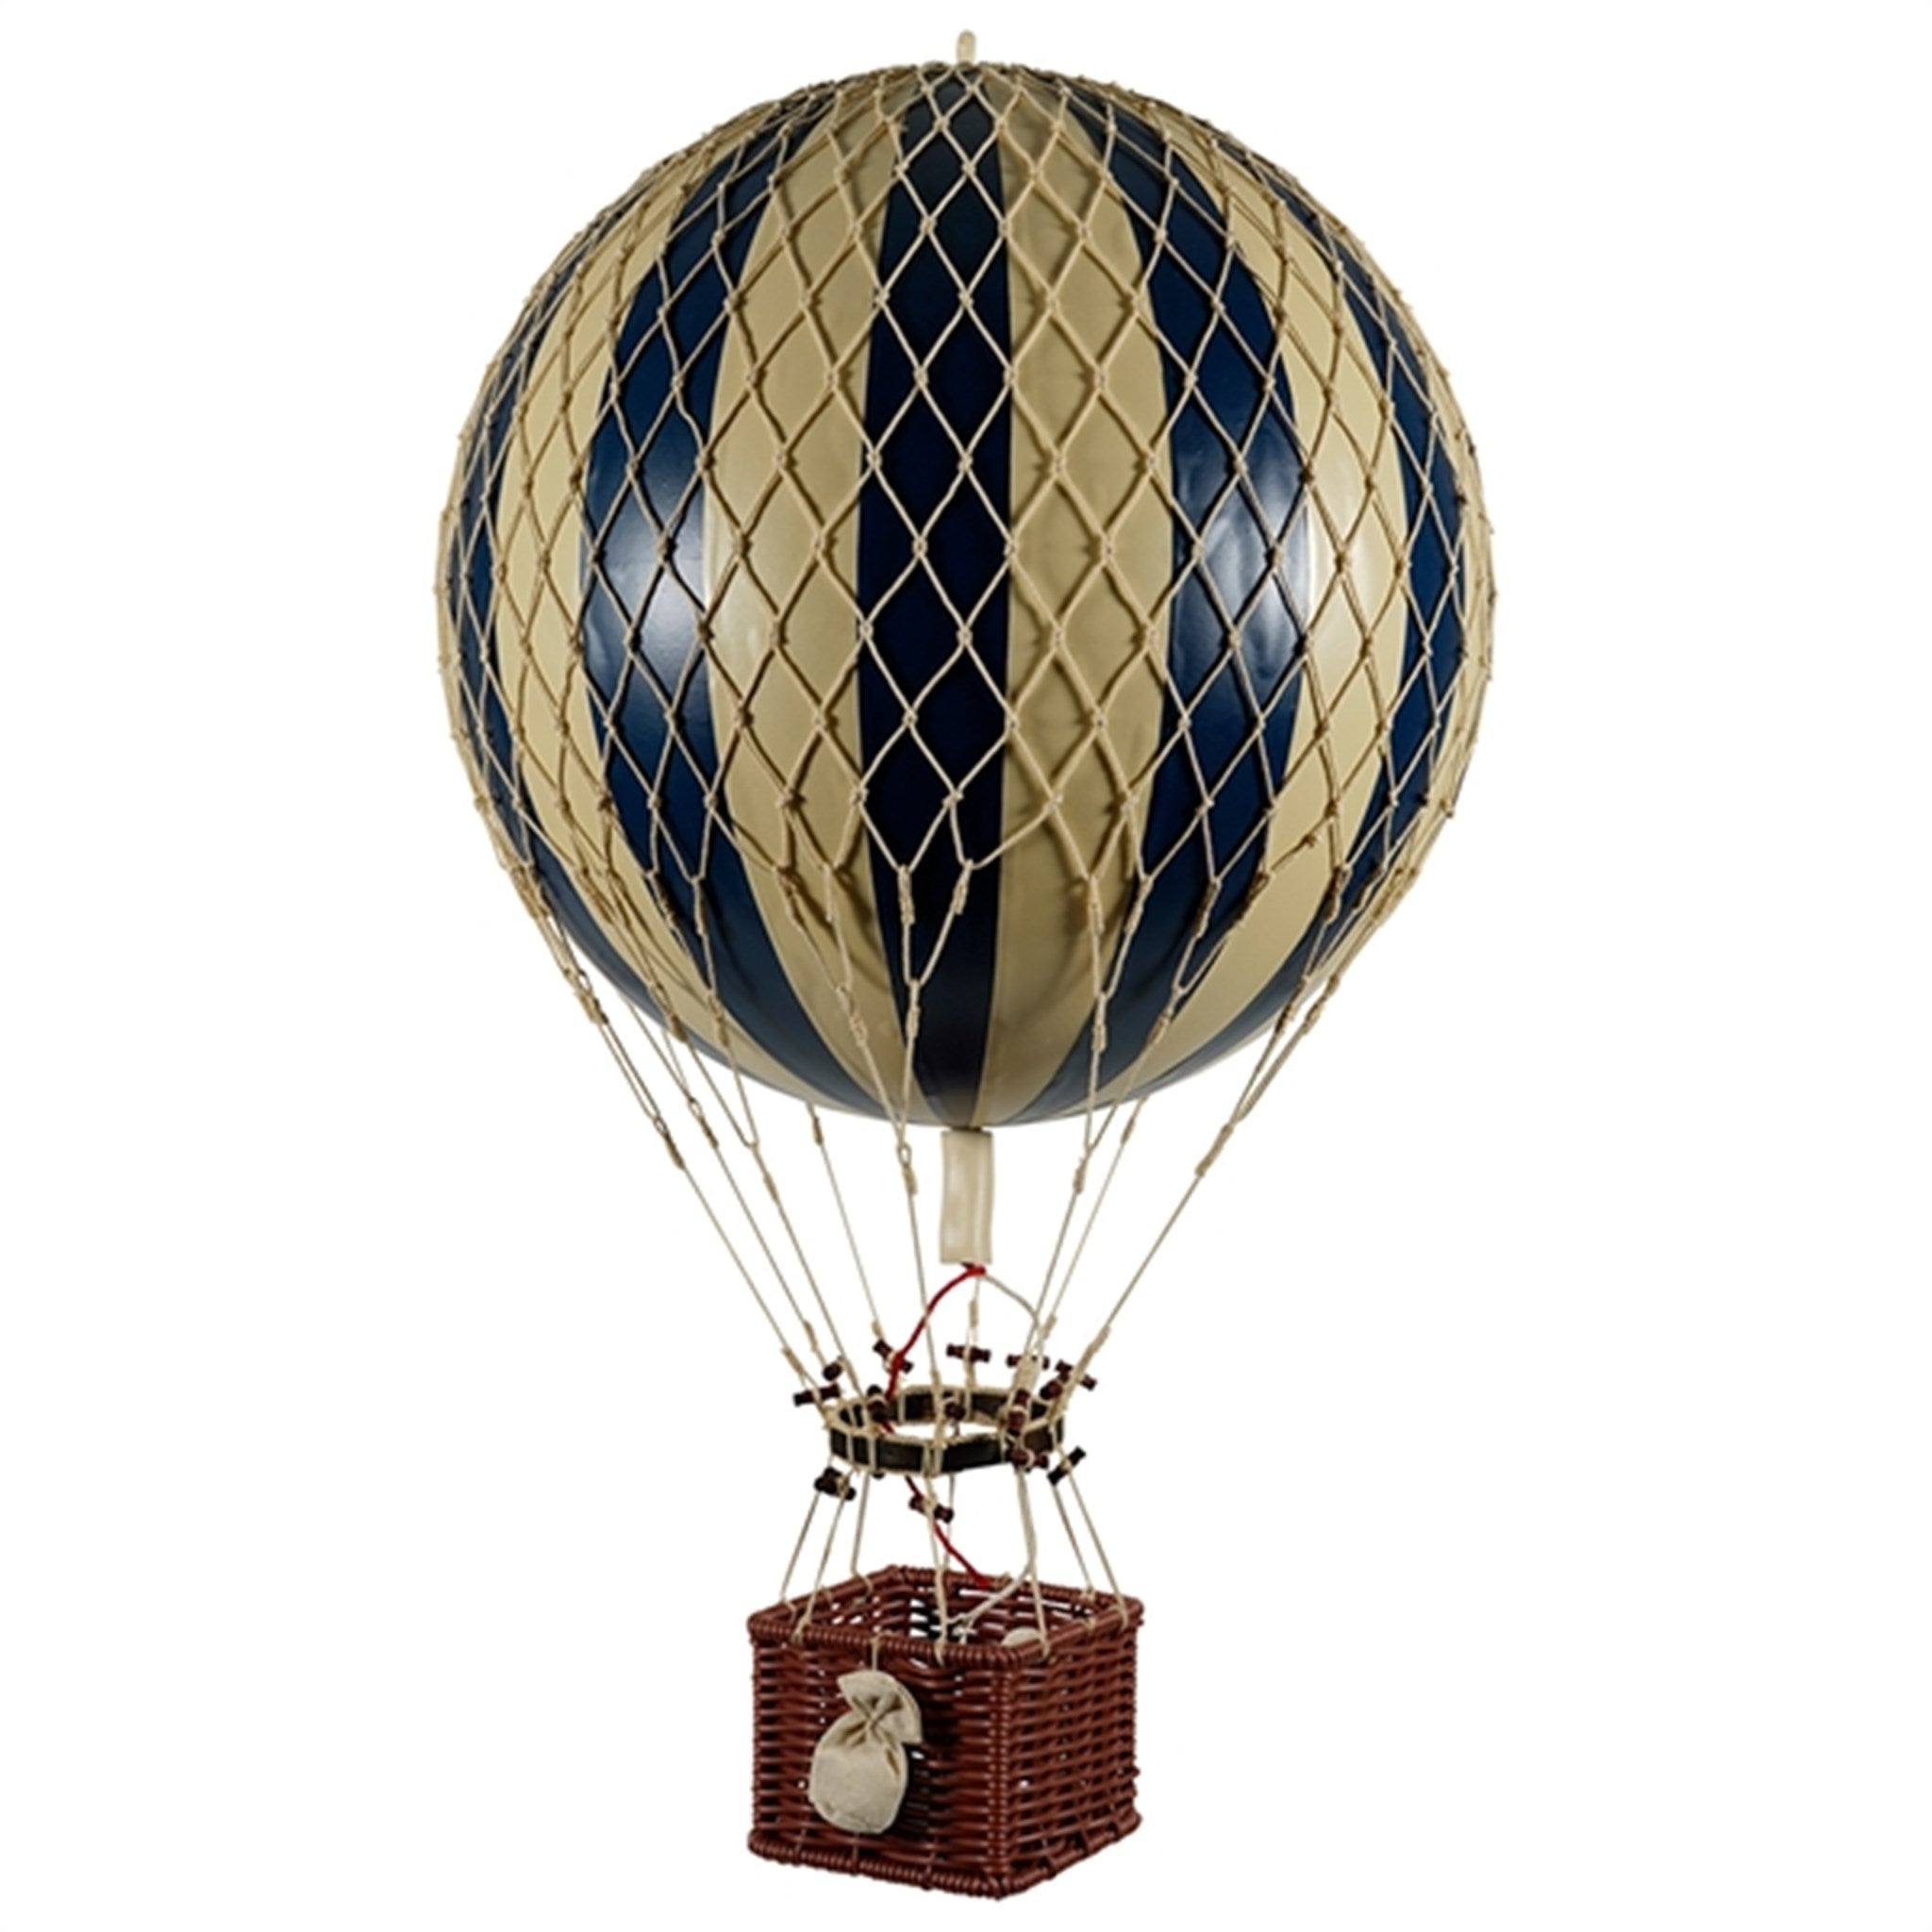 Authentic Models Balloon Navy Blue/Ivory 32 cm